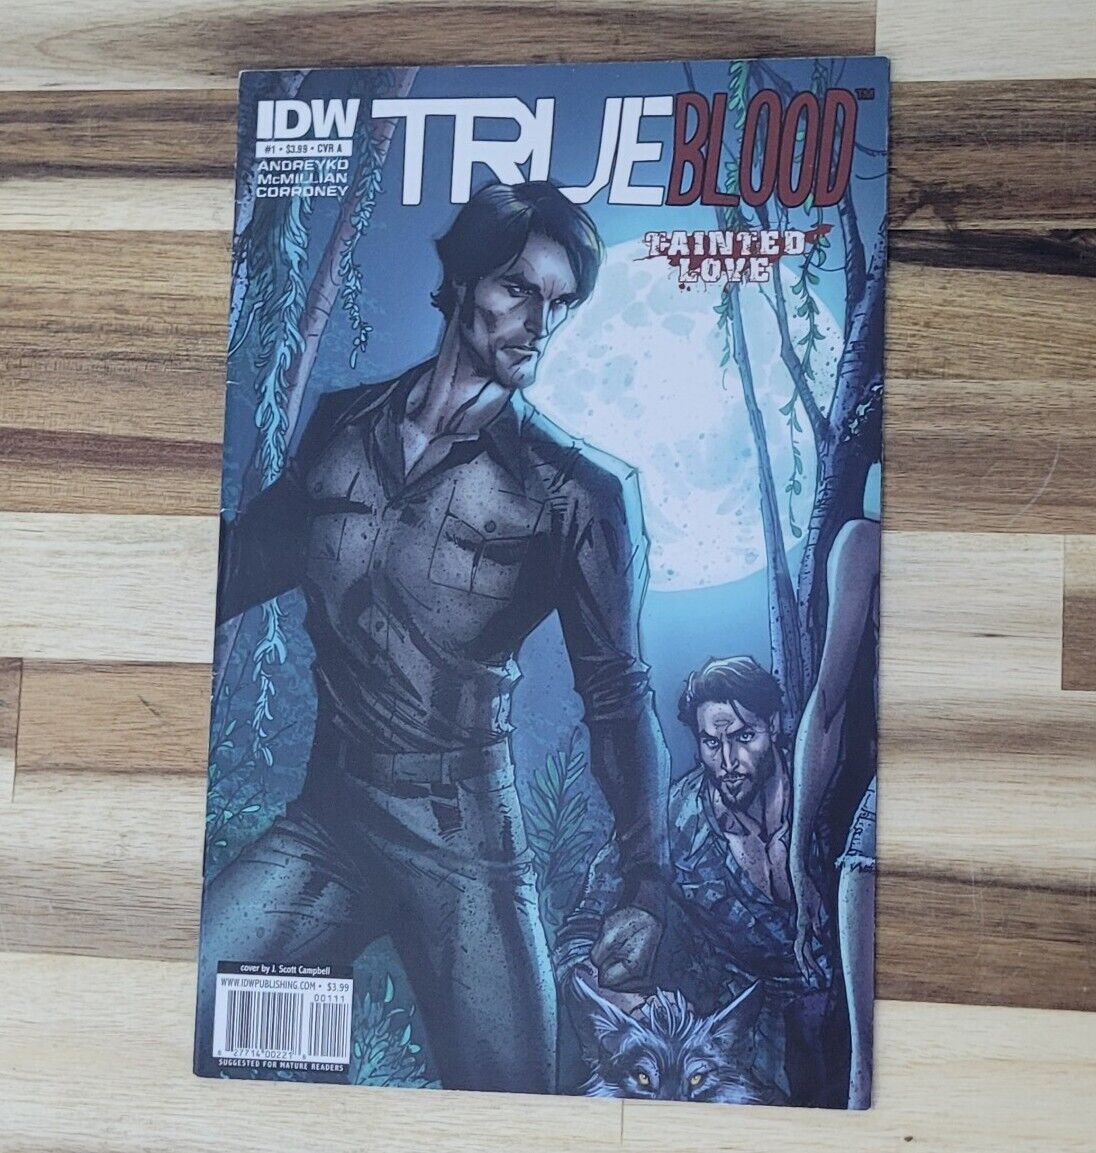 TRUE BLOOD Tainted Love IDW #1 February 2011 First Printing Comic Book by HBO